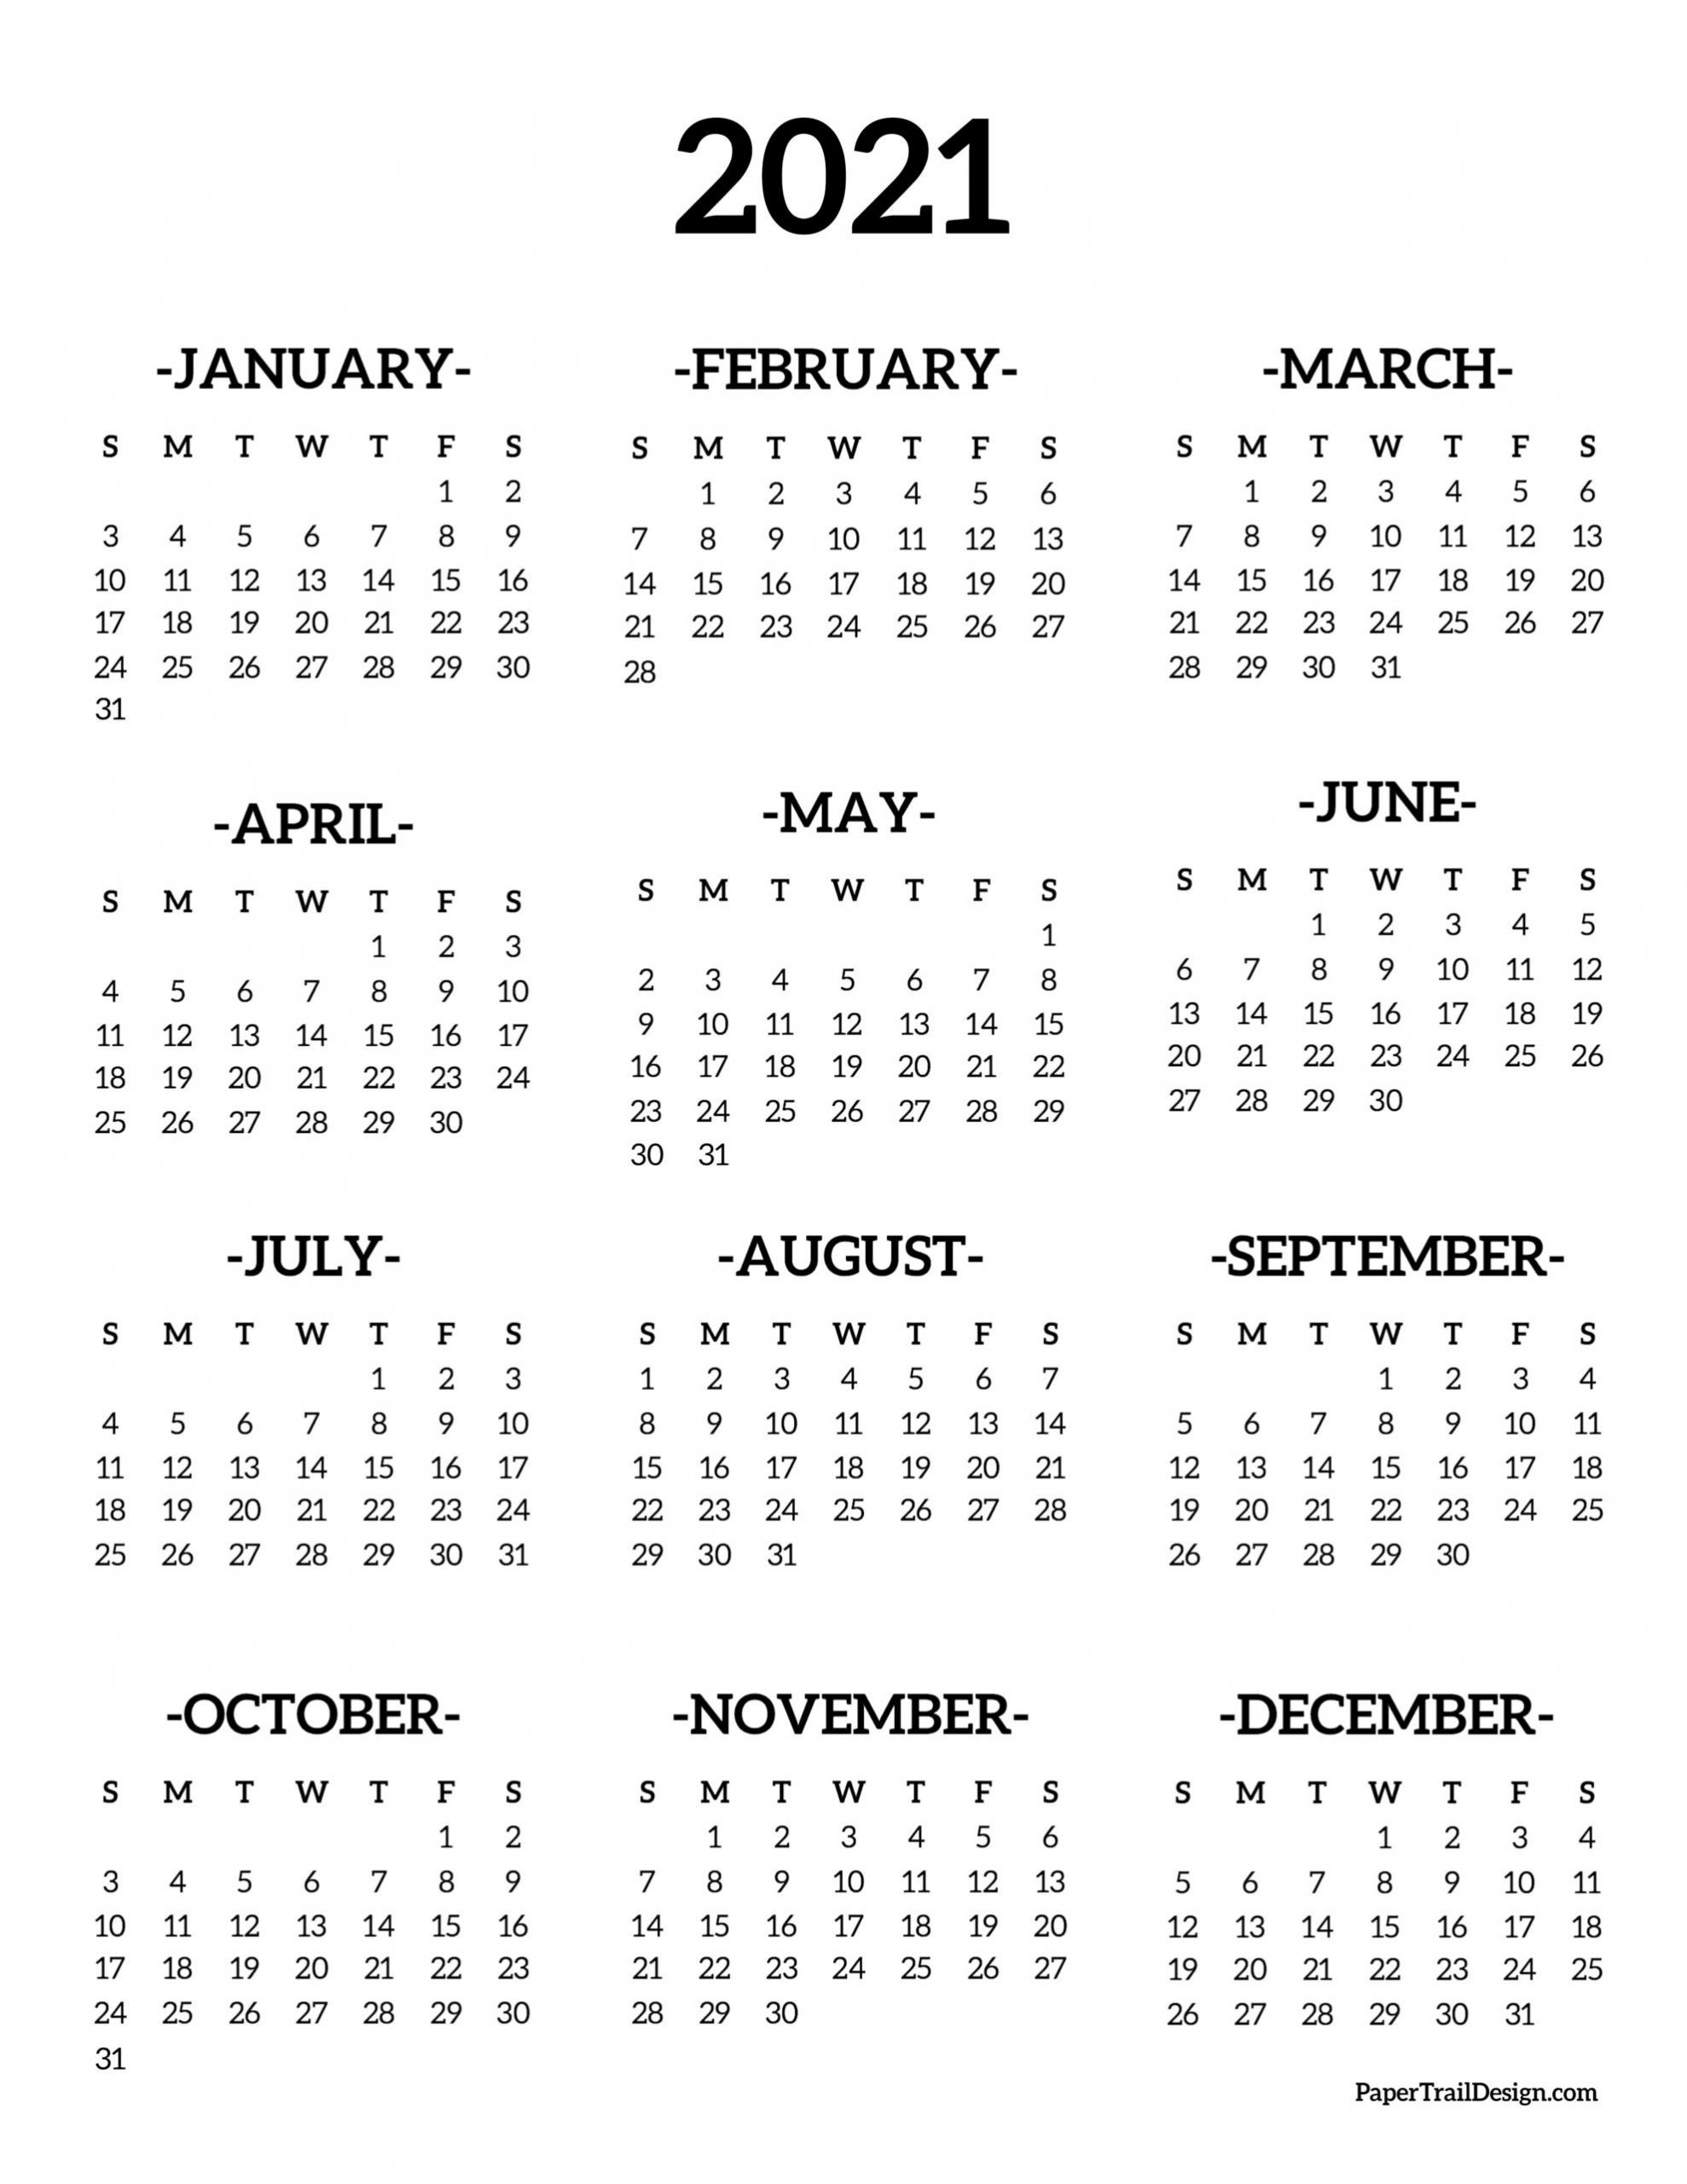 Calendar 2021 Printable One Page | Paper Trail Design-Free Printable 2021 School Year At A Glance Calendar